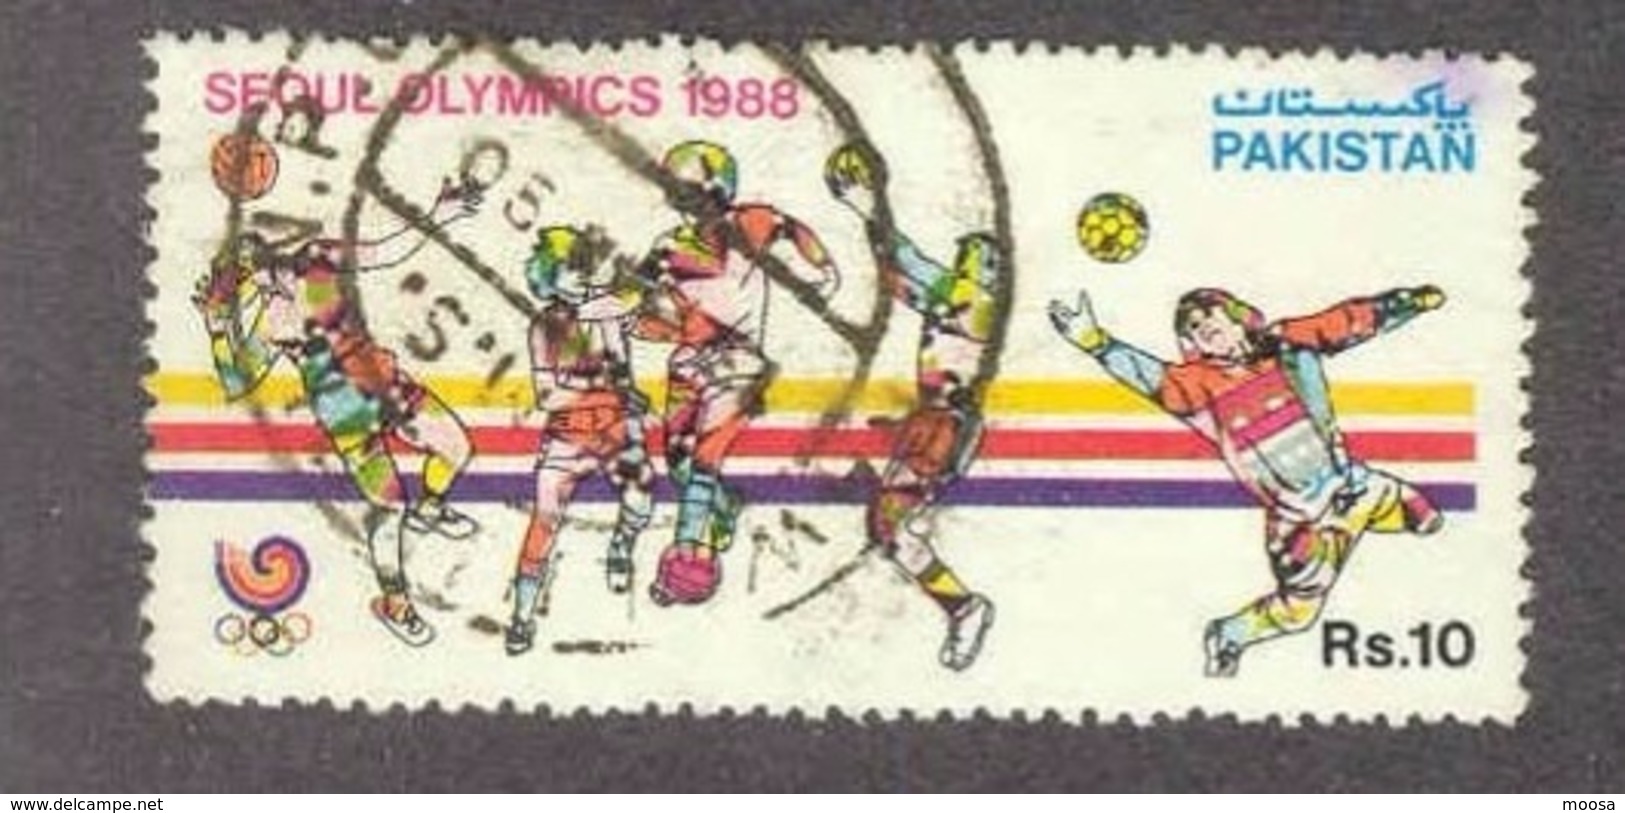 (Free Shipping*) Pakistan Sports Soccer Olympics 1988 USED STAMP - Estate 1988: Seul